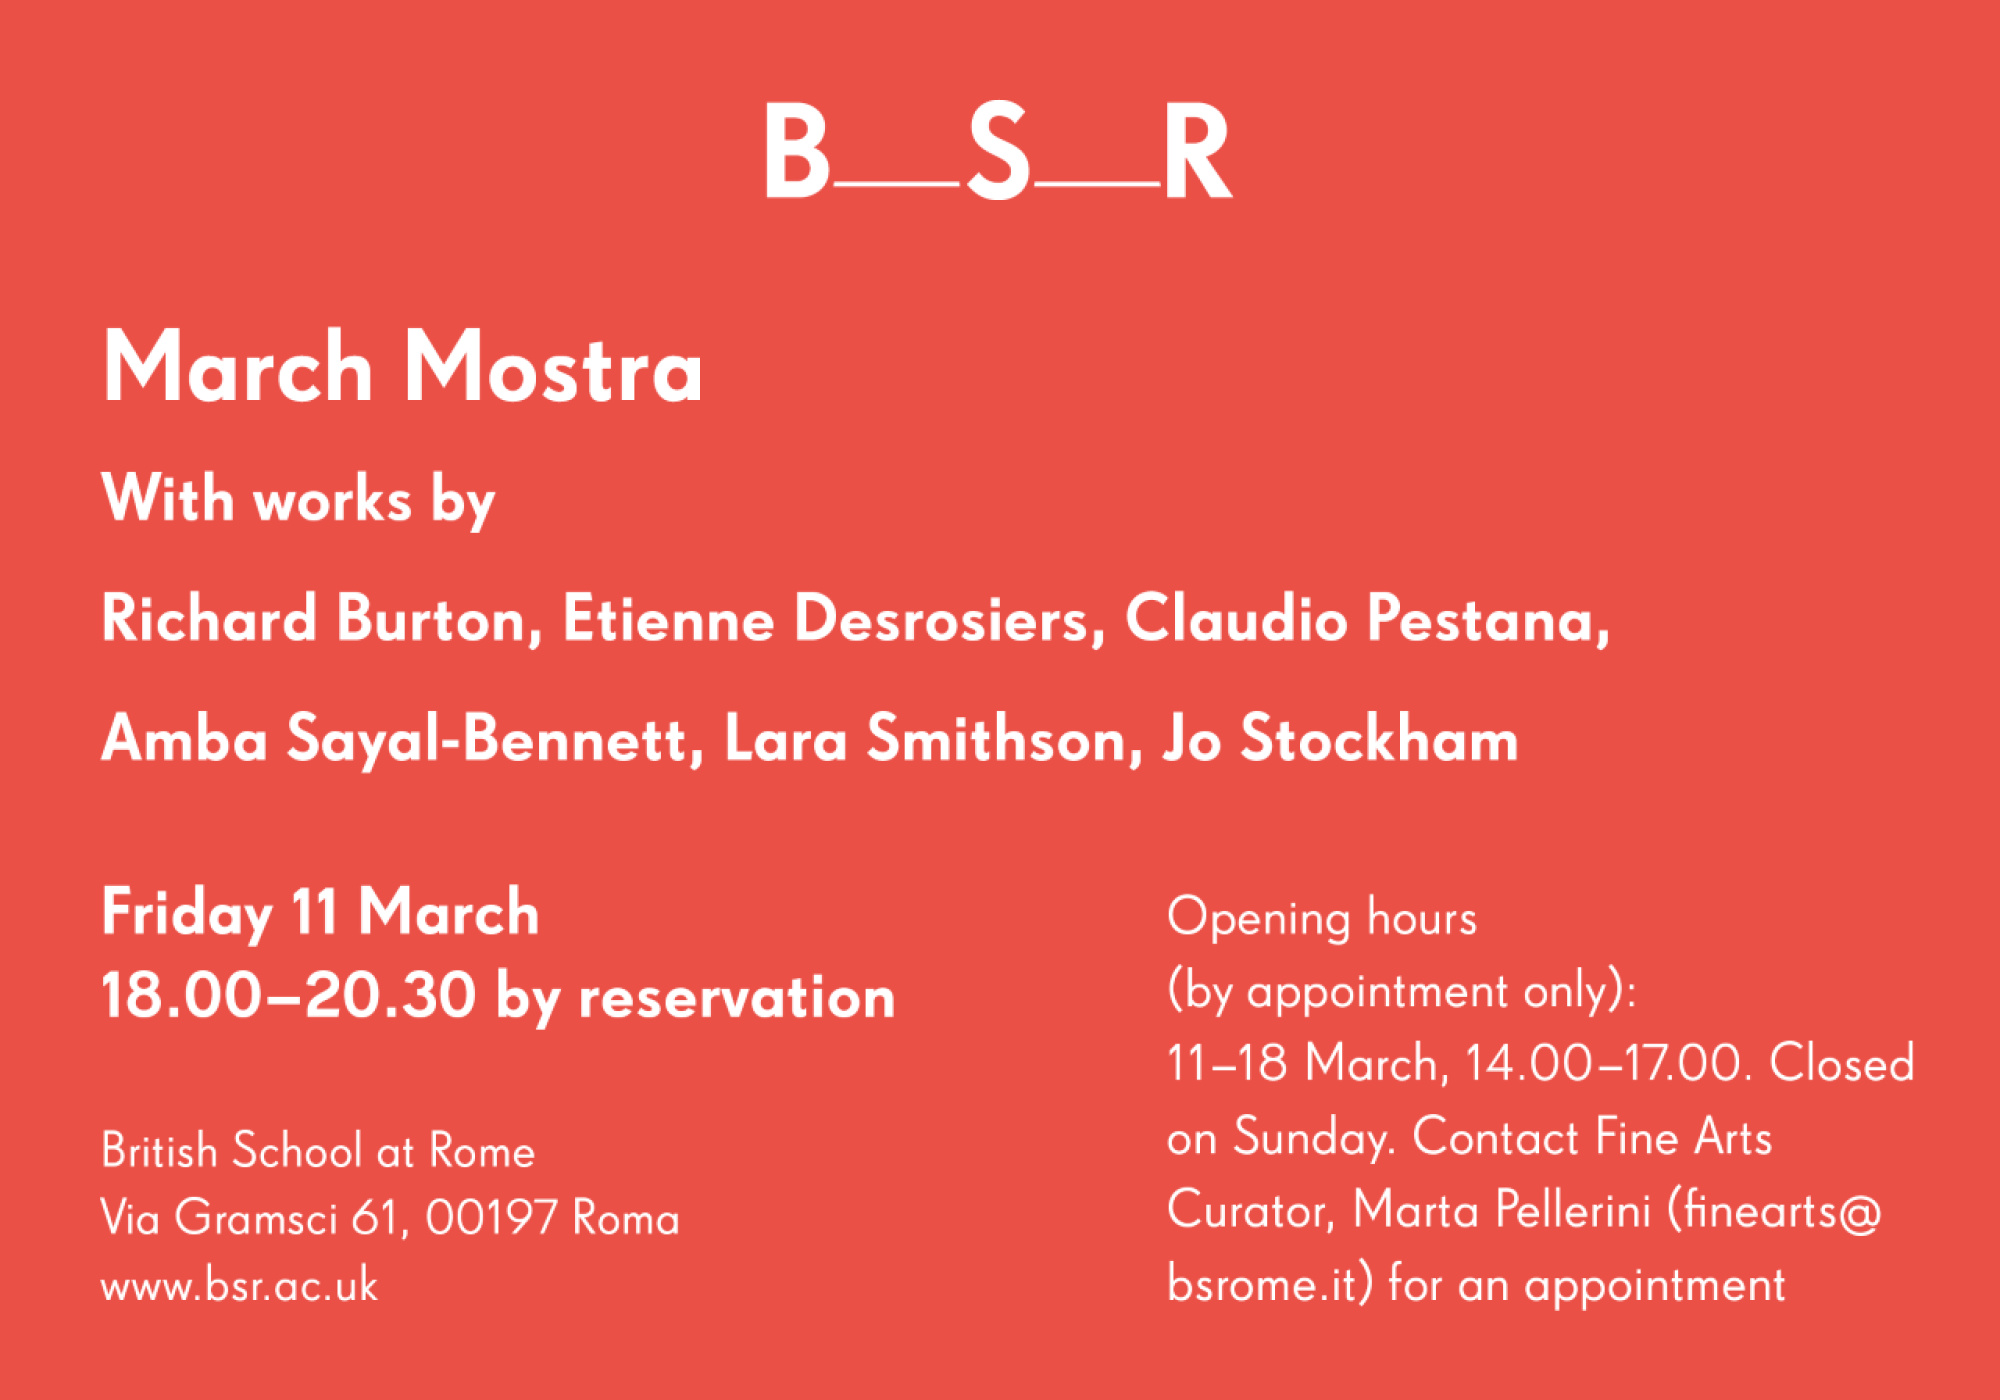 March Mostra 2022 - British School at Rome